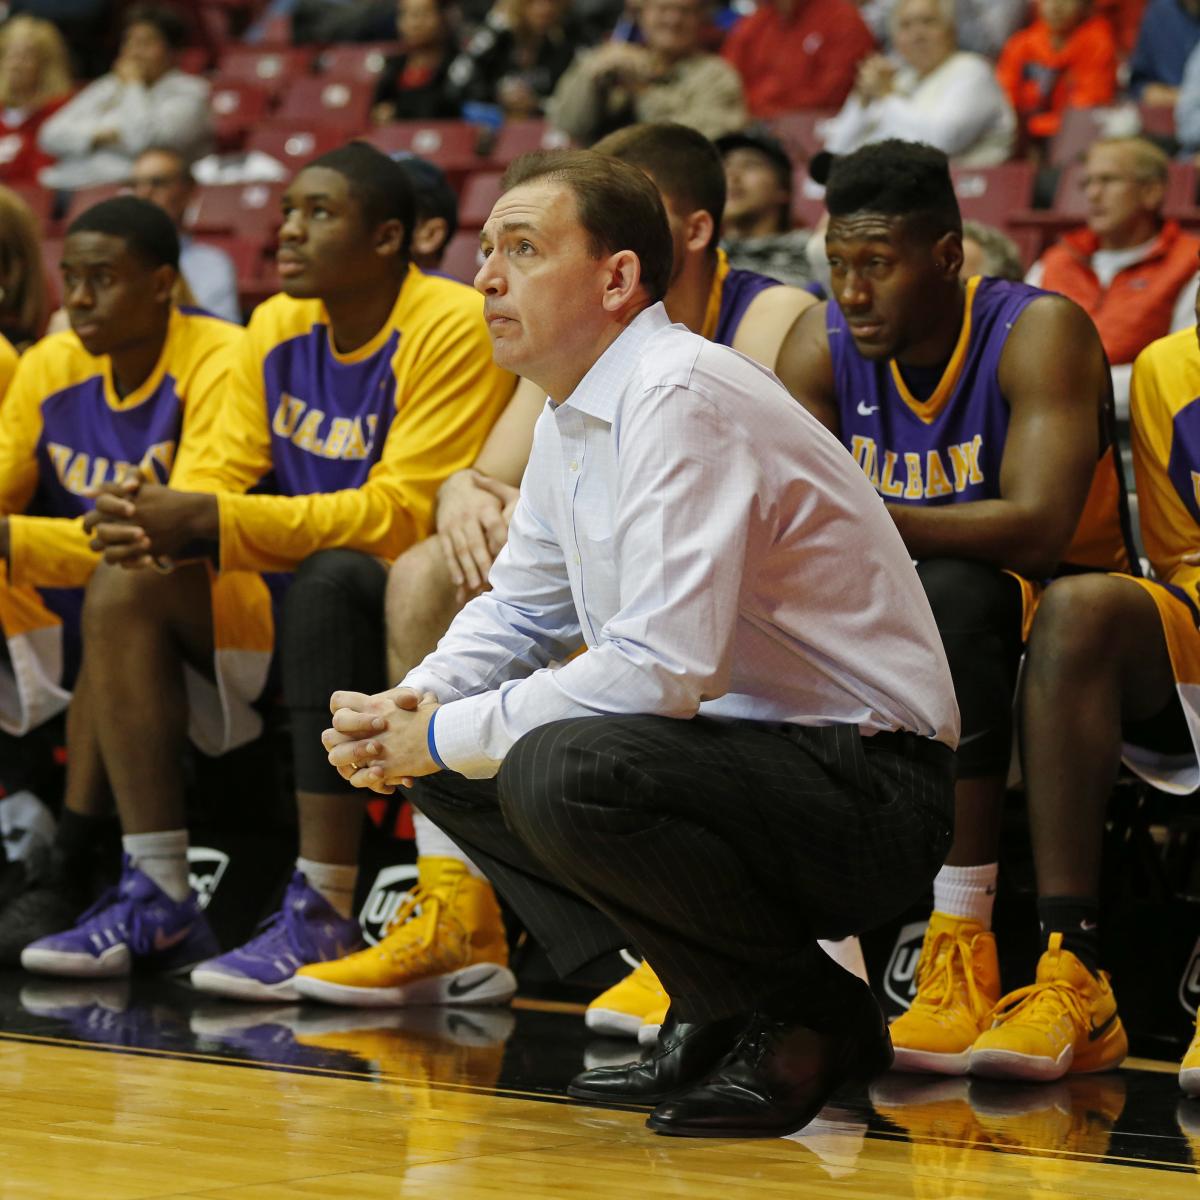 Will Brown Is now not going to Return as Albany CBB HC After 20 Years with Program